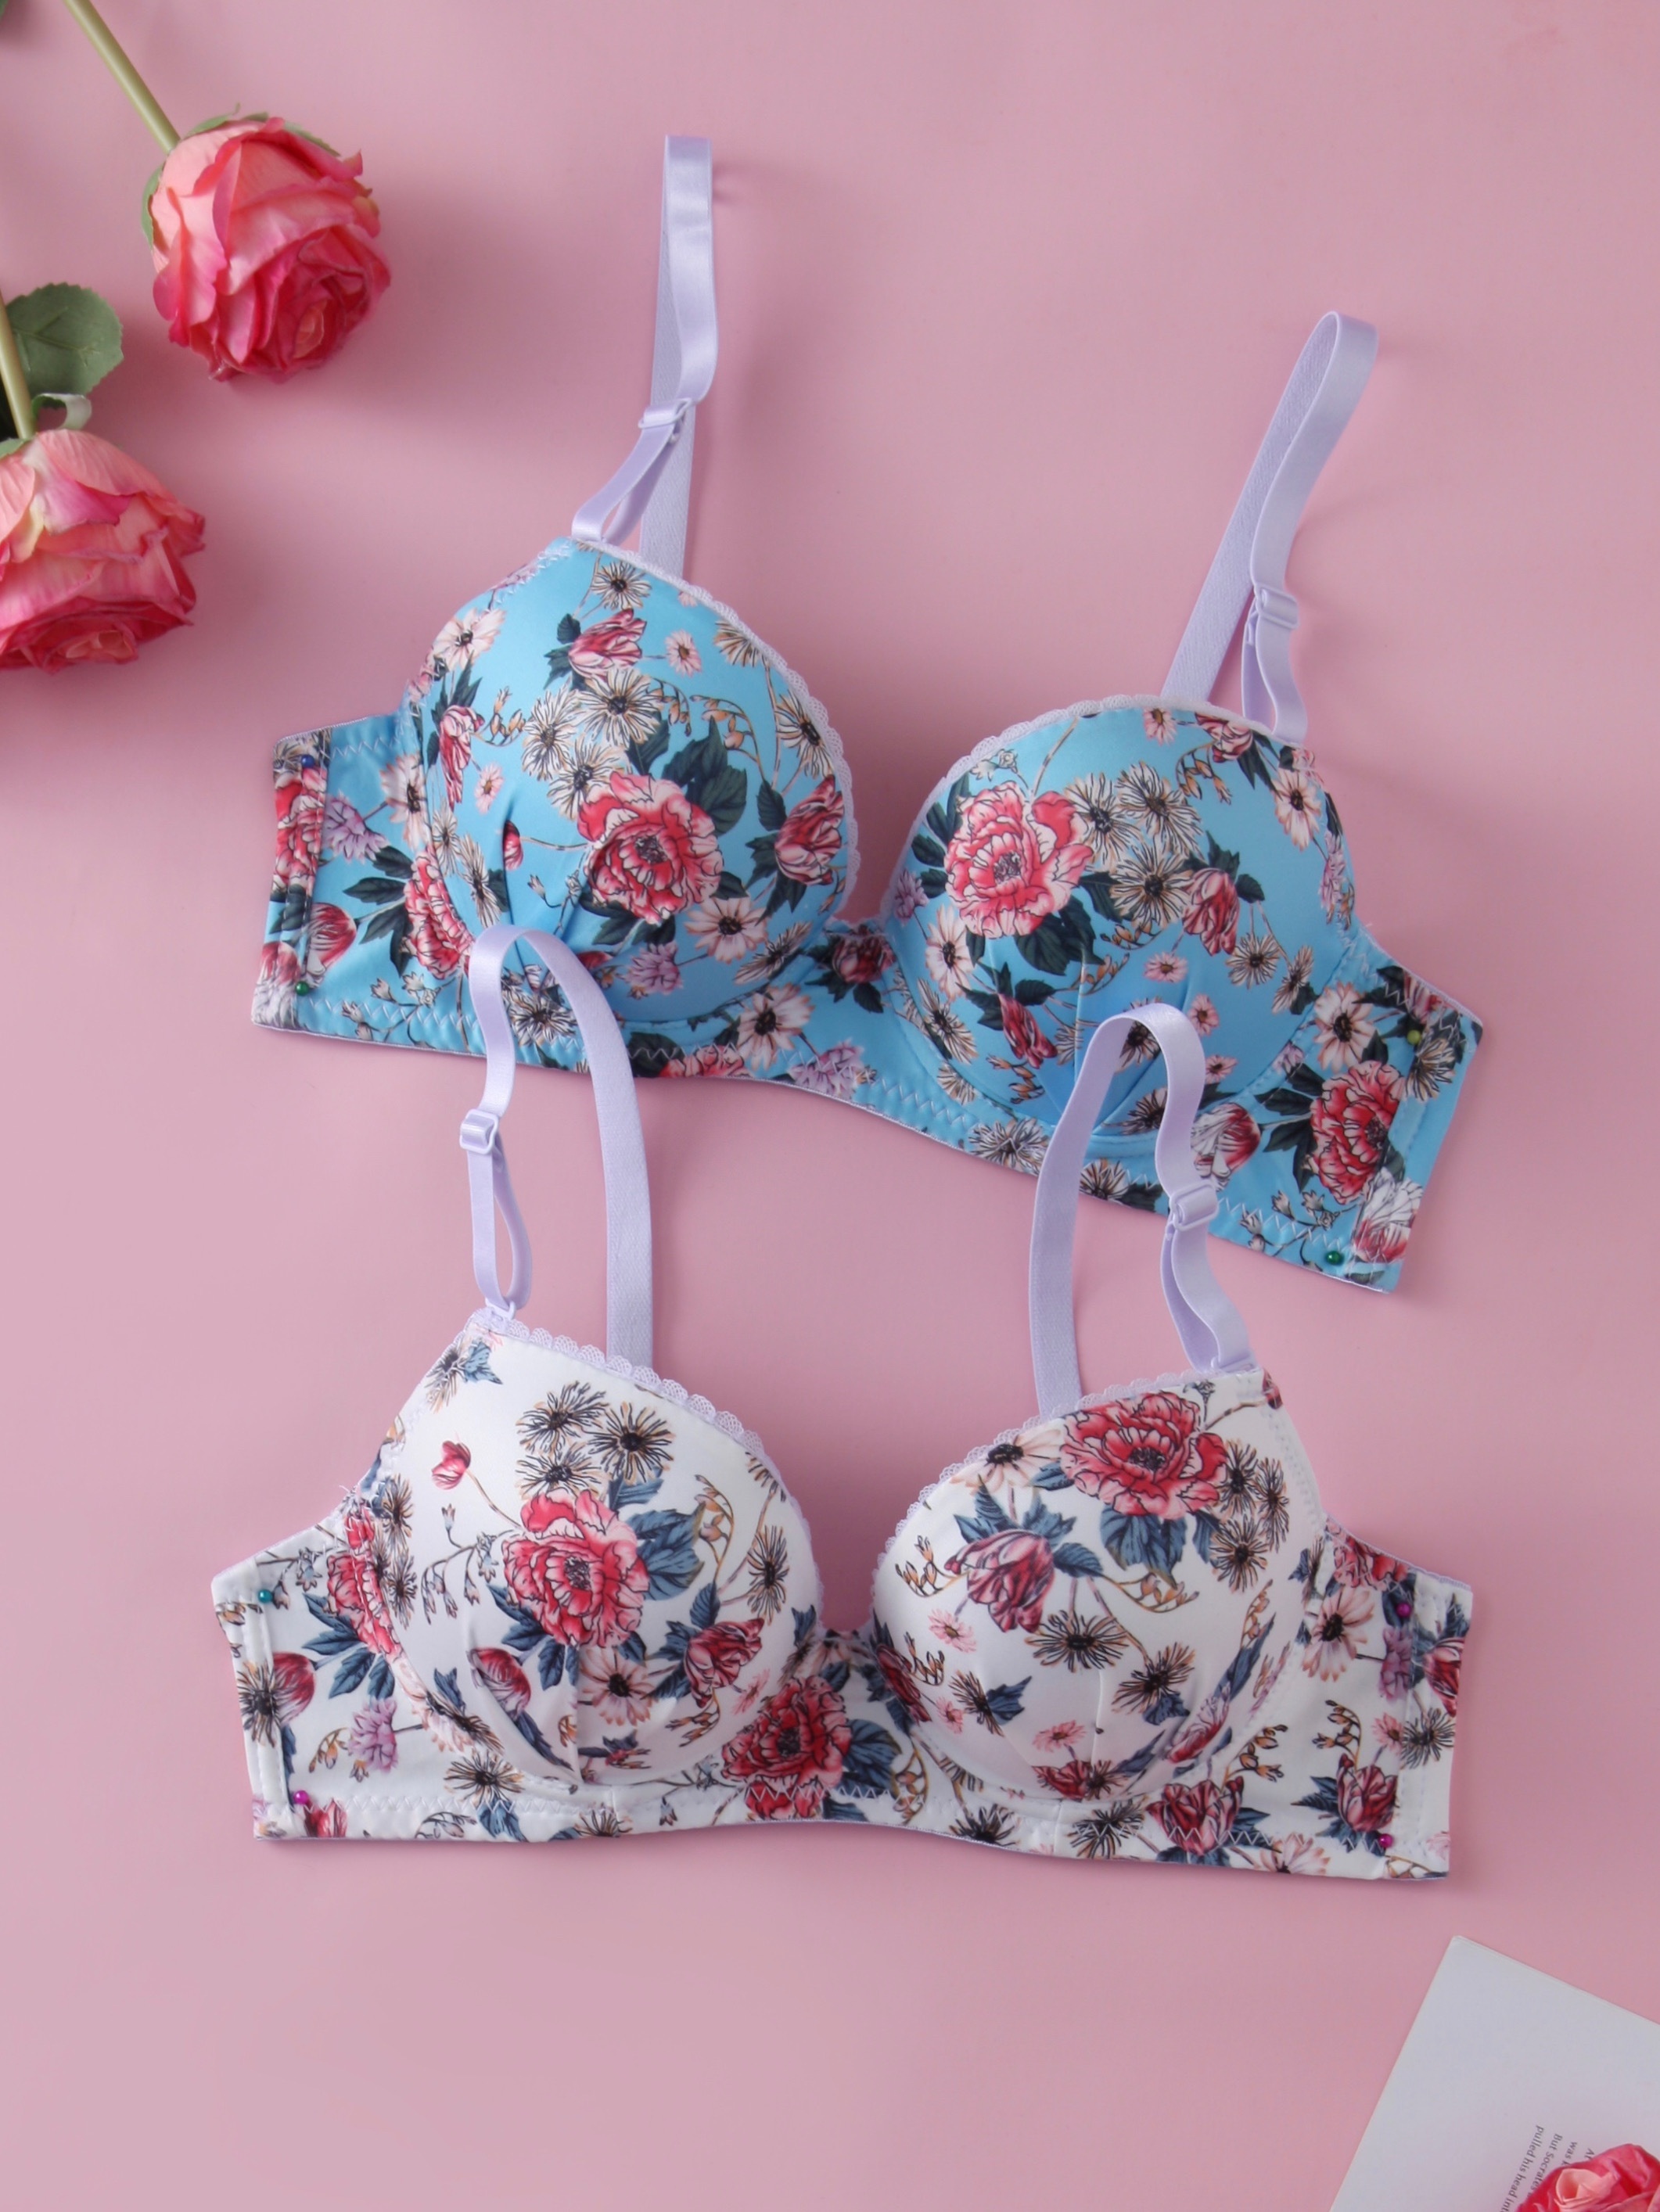 Pack Of 4 Bras For Women - High Quality Floral Heart Printed Comfortable  Jersey Bras For Women, Bras For Ladies Brassiere Smooth & Stretchable  Fabric And High Quality Chinese Elastic Is Used